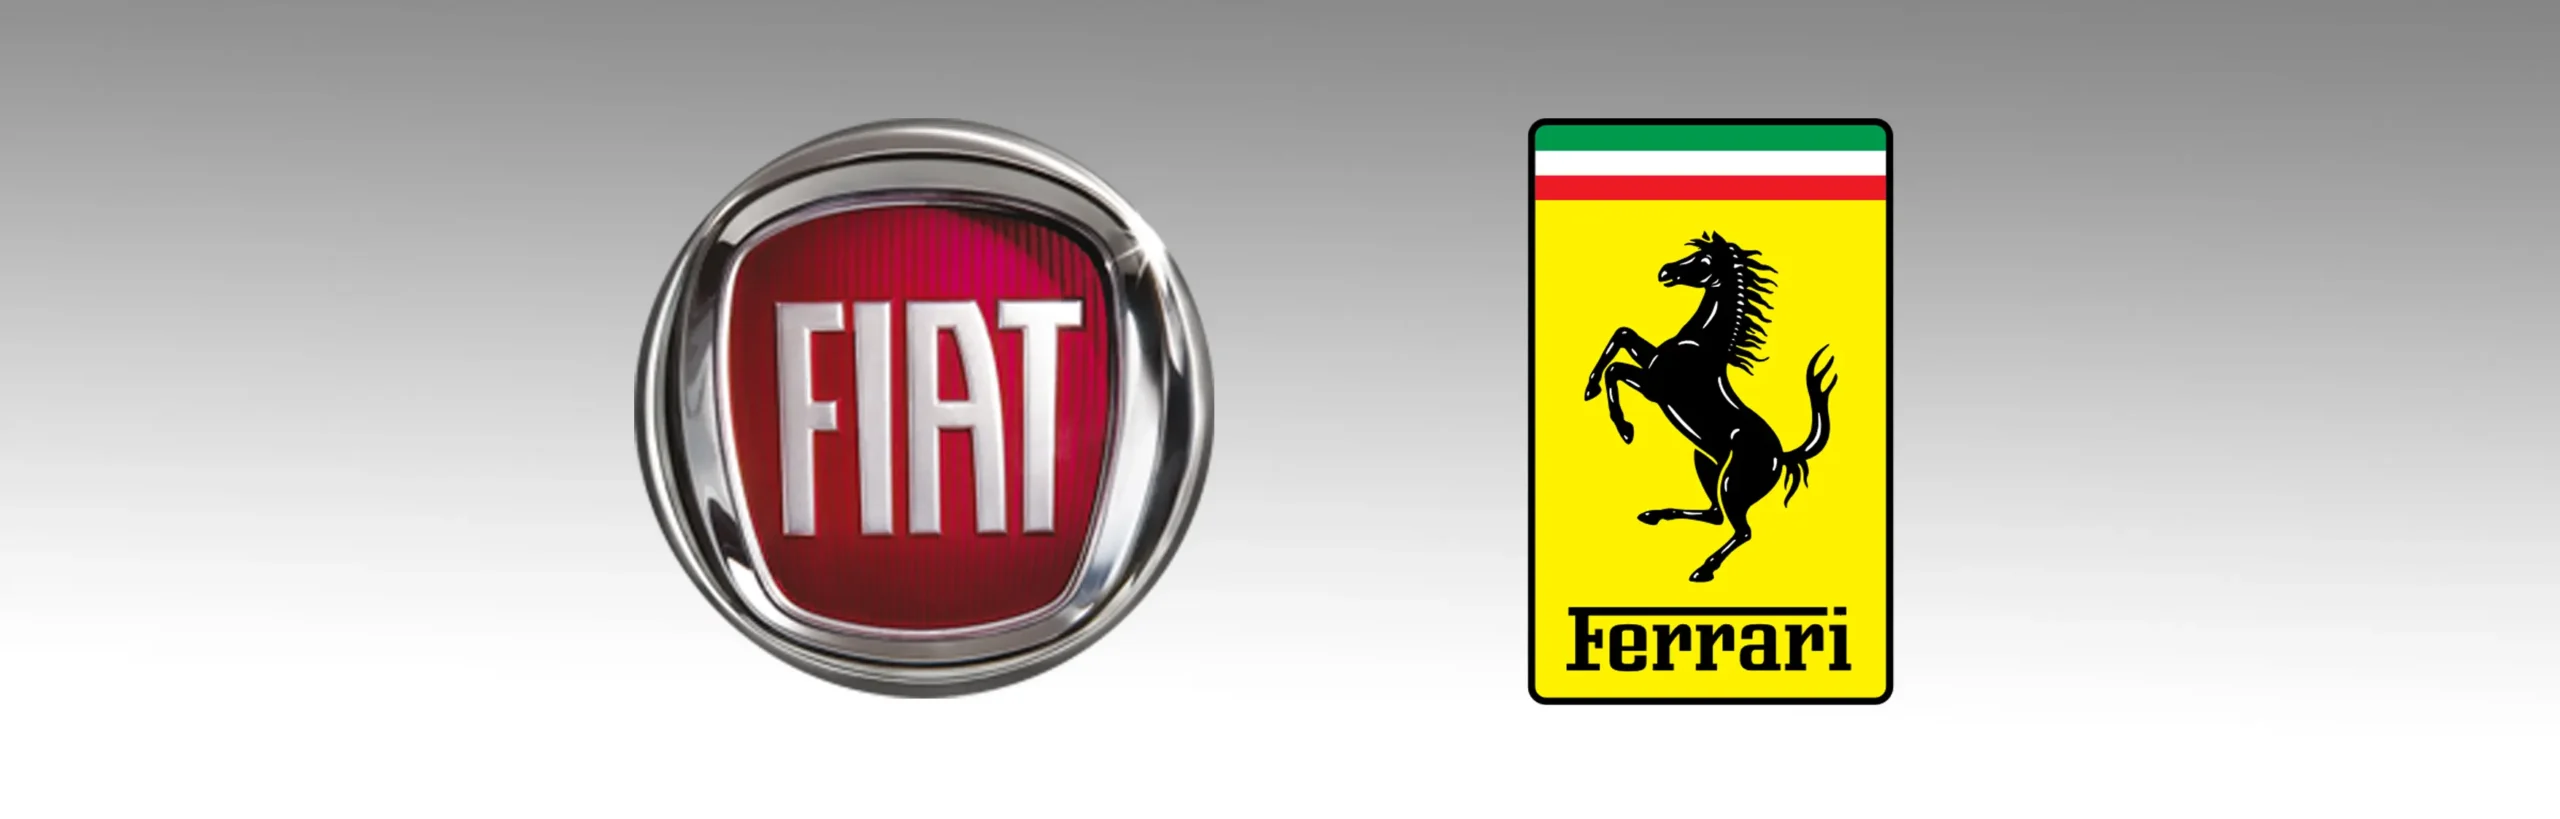 ferrari and fiat separation - What is the spin off of Fiat Chrysler Ferrari